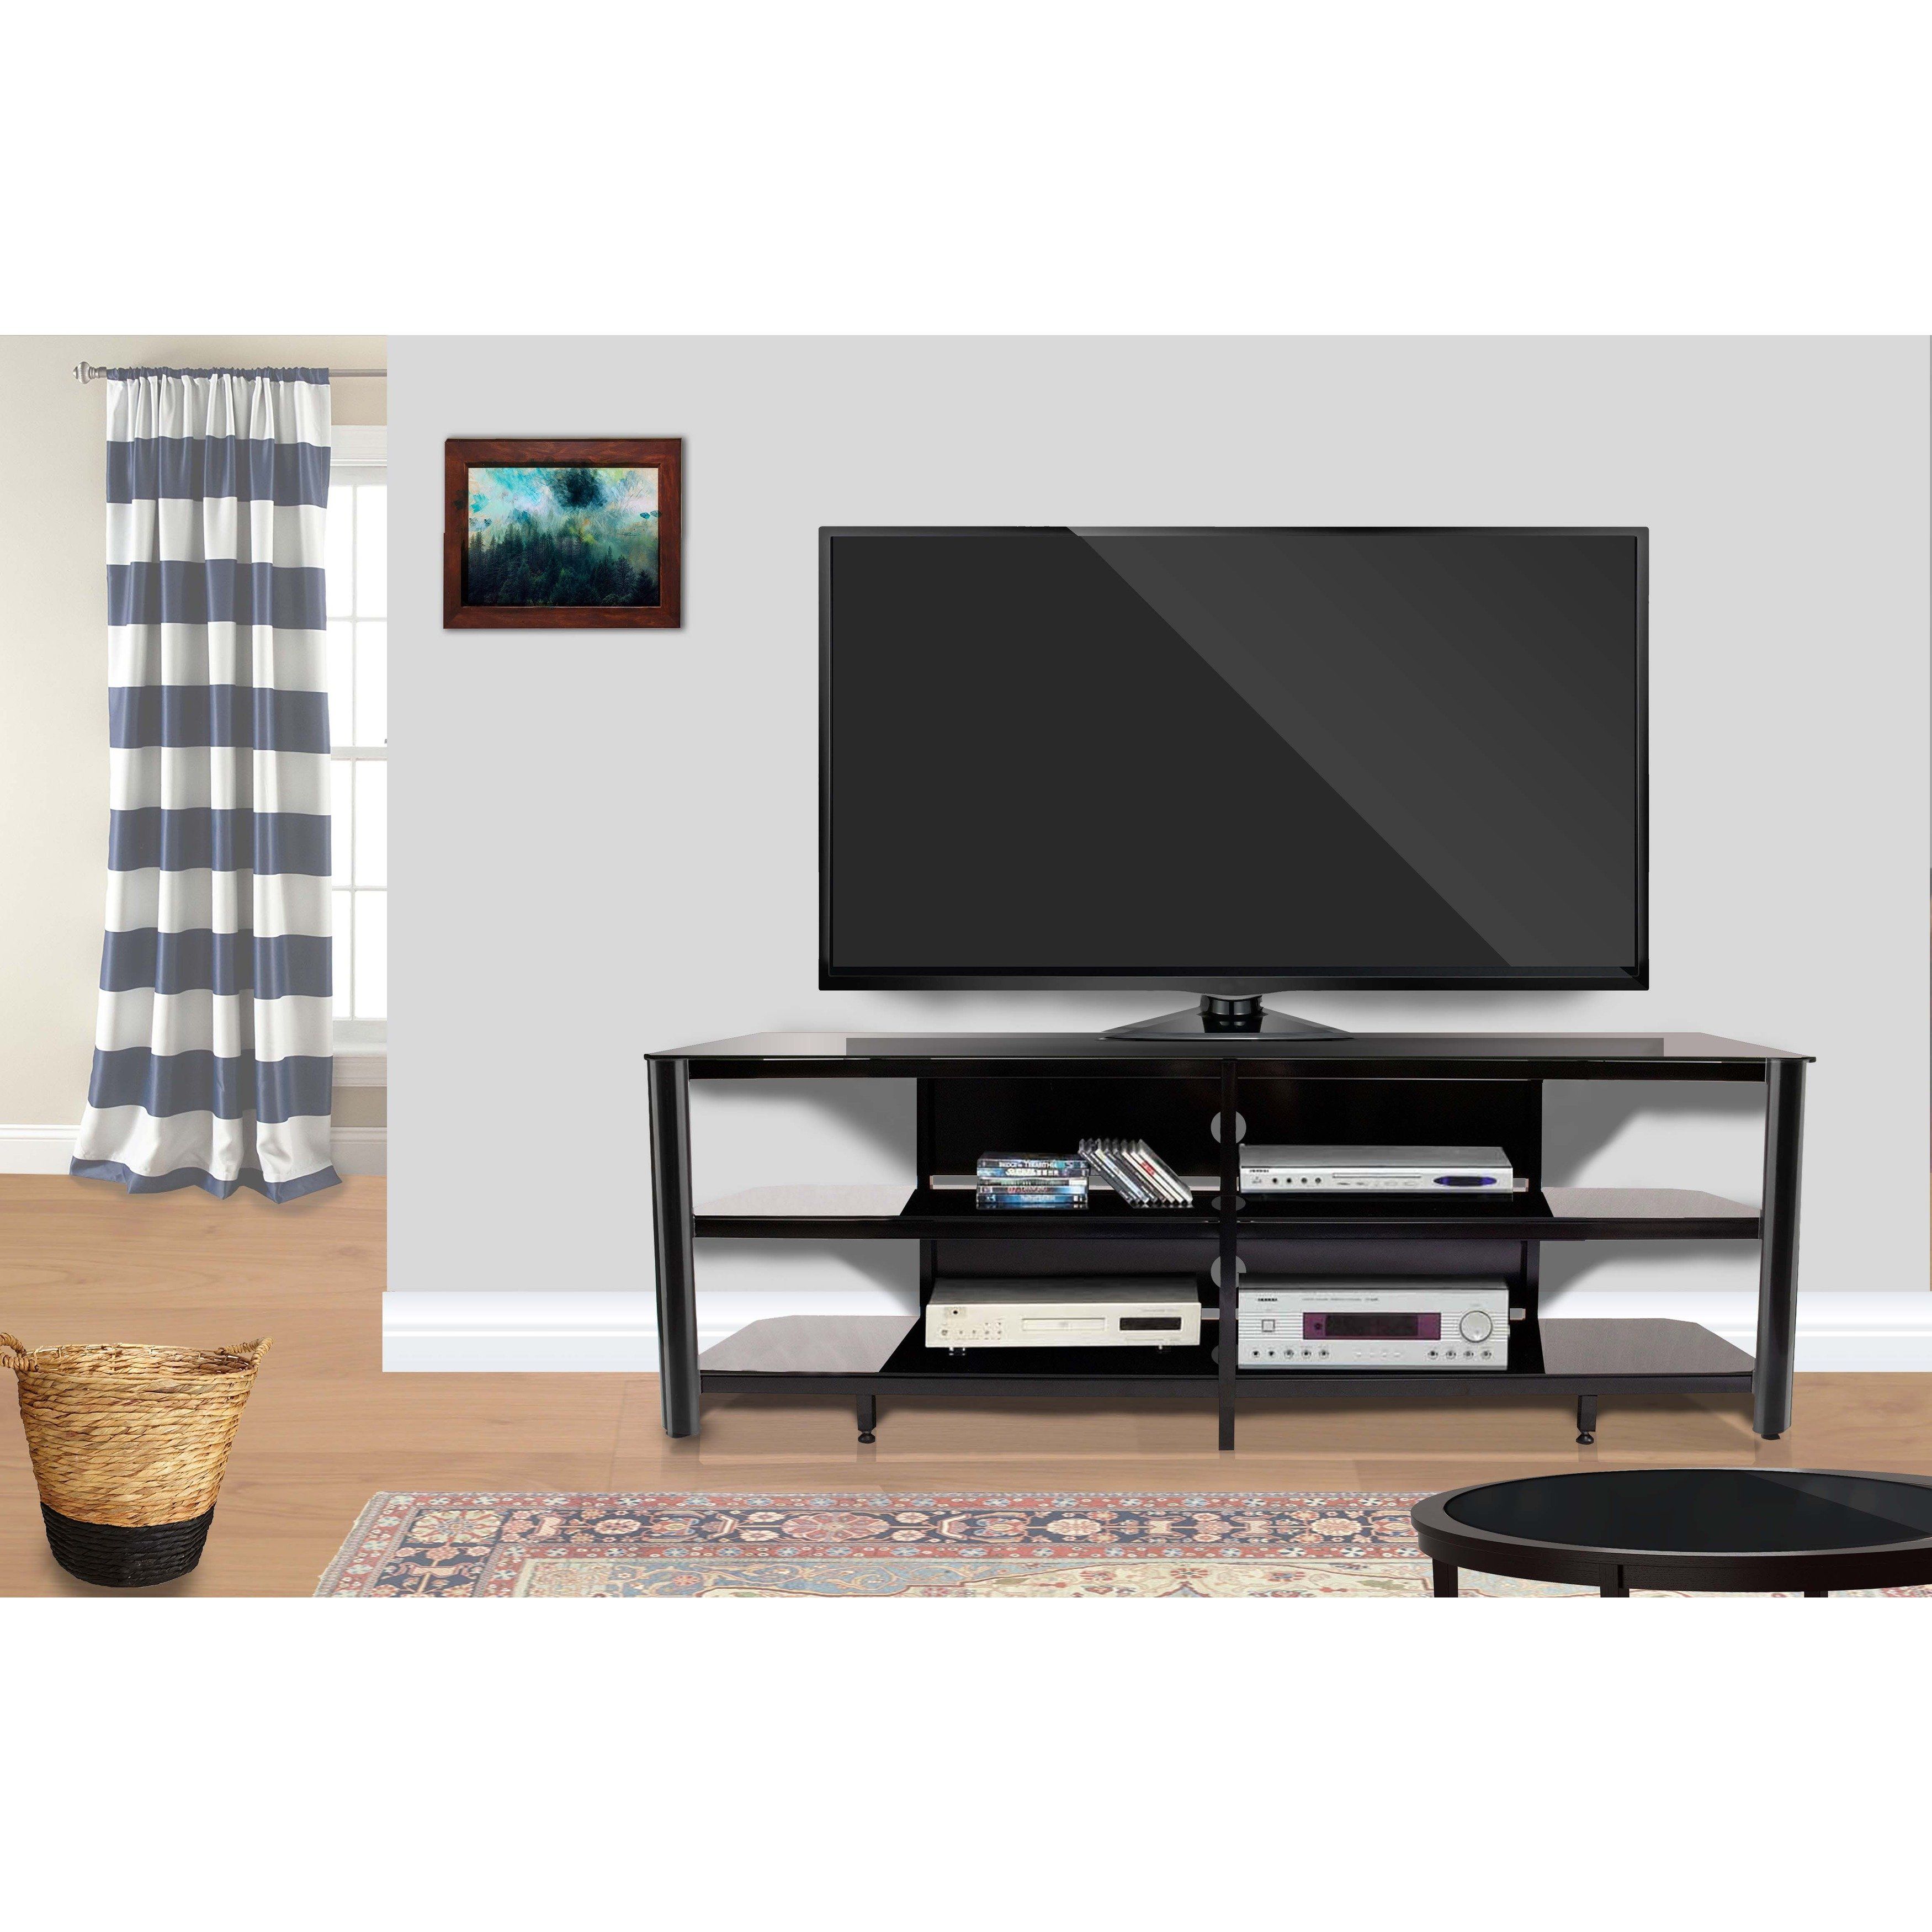 Shop Fold 'n' Snap Oxford 73 Inch Black Innovex Tv Stand – Ships To With Regard To Oxford 60 Inch Tv Stands (View 5 of 30)